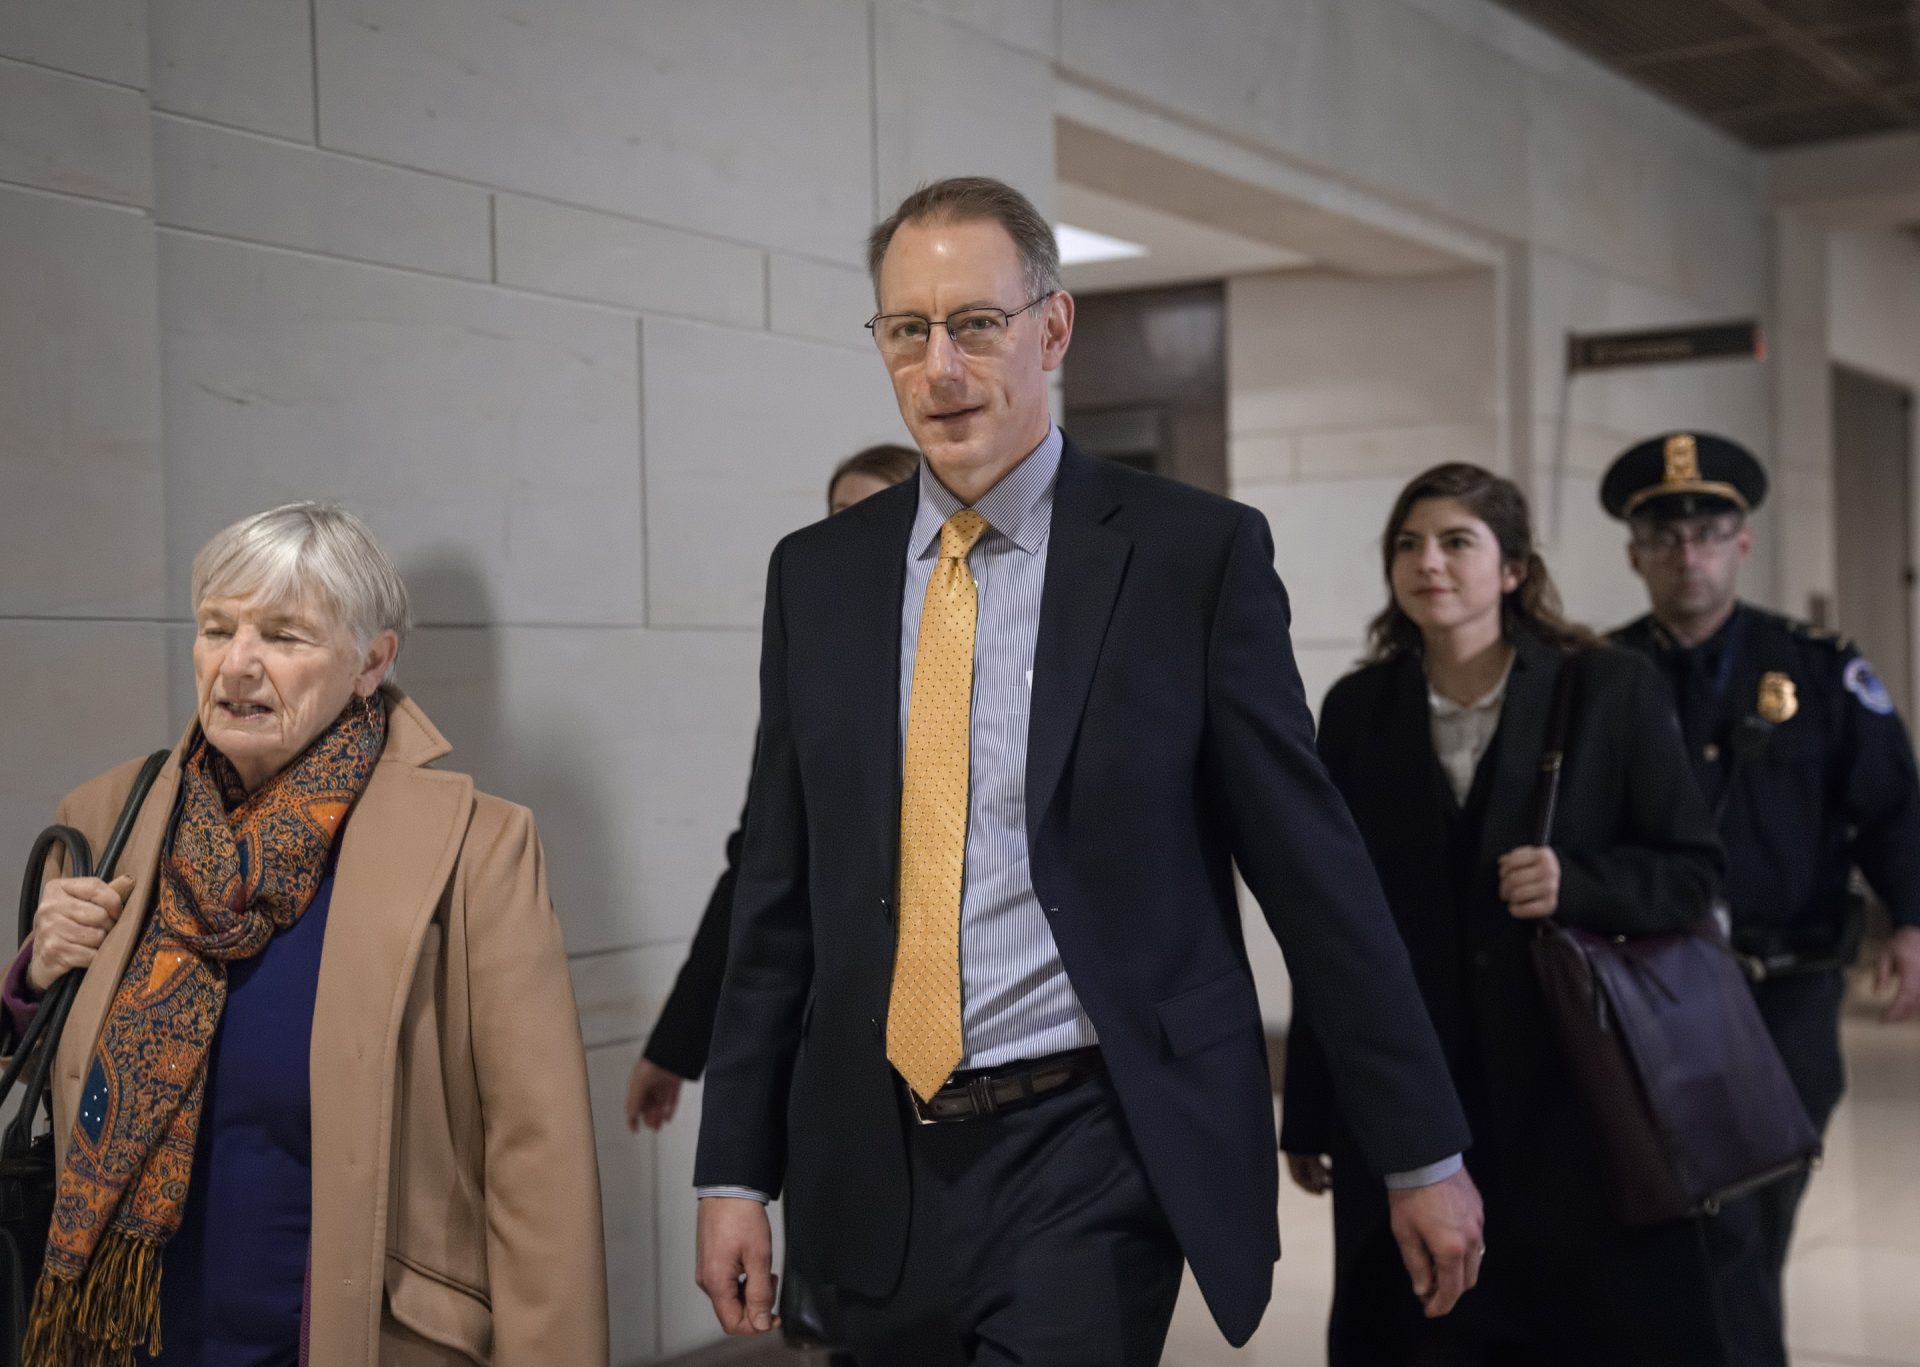 Mark Sandy, a career employee in the White House Office of Management and Budget, arrives at the Capitol to testify in the House Democrats' impeachment inquiry about President Donald Trump's effort to tie military aid for Ukraine to investigations of his political opponents, in Washington, Saturday, Nov. 16, 2019.